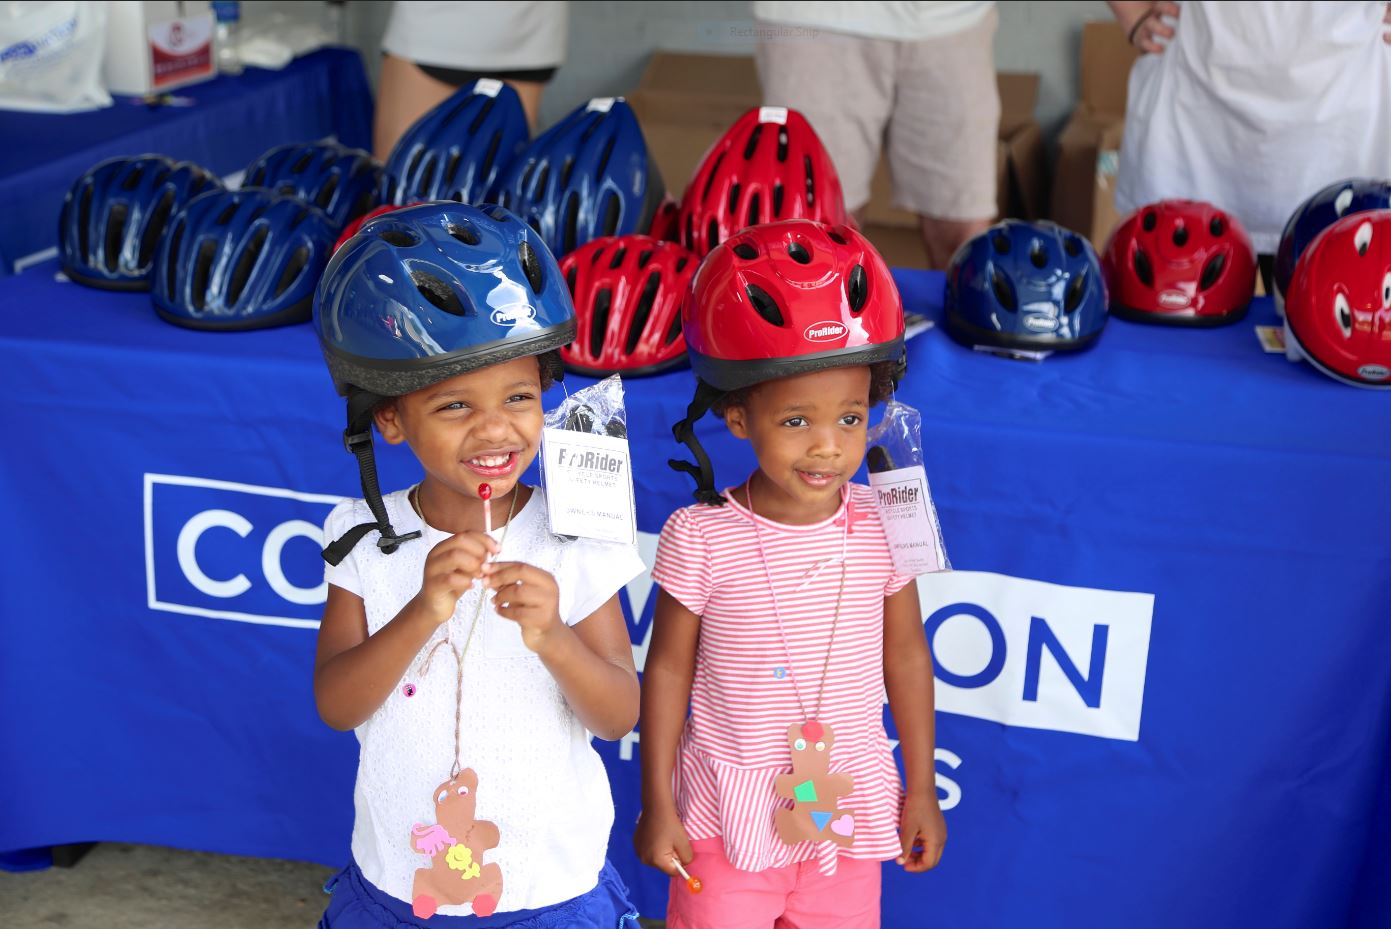 Each child was fitted with a helmet and received a bicycle safety-themed goodie bag with crayons and coloring books.